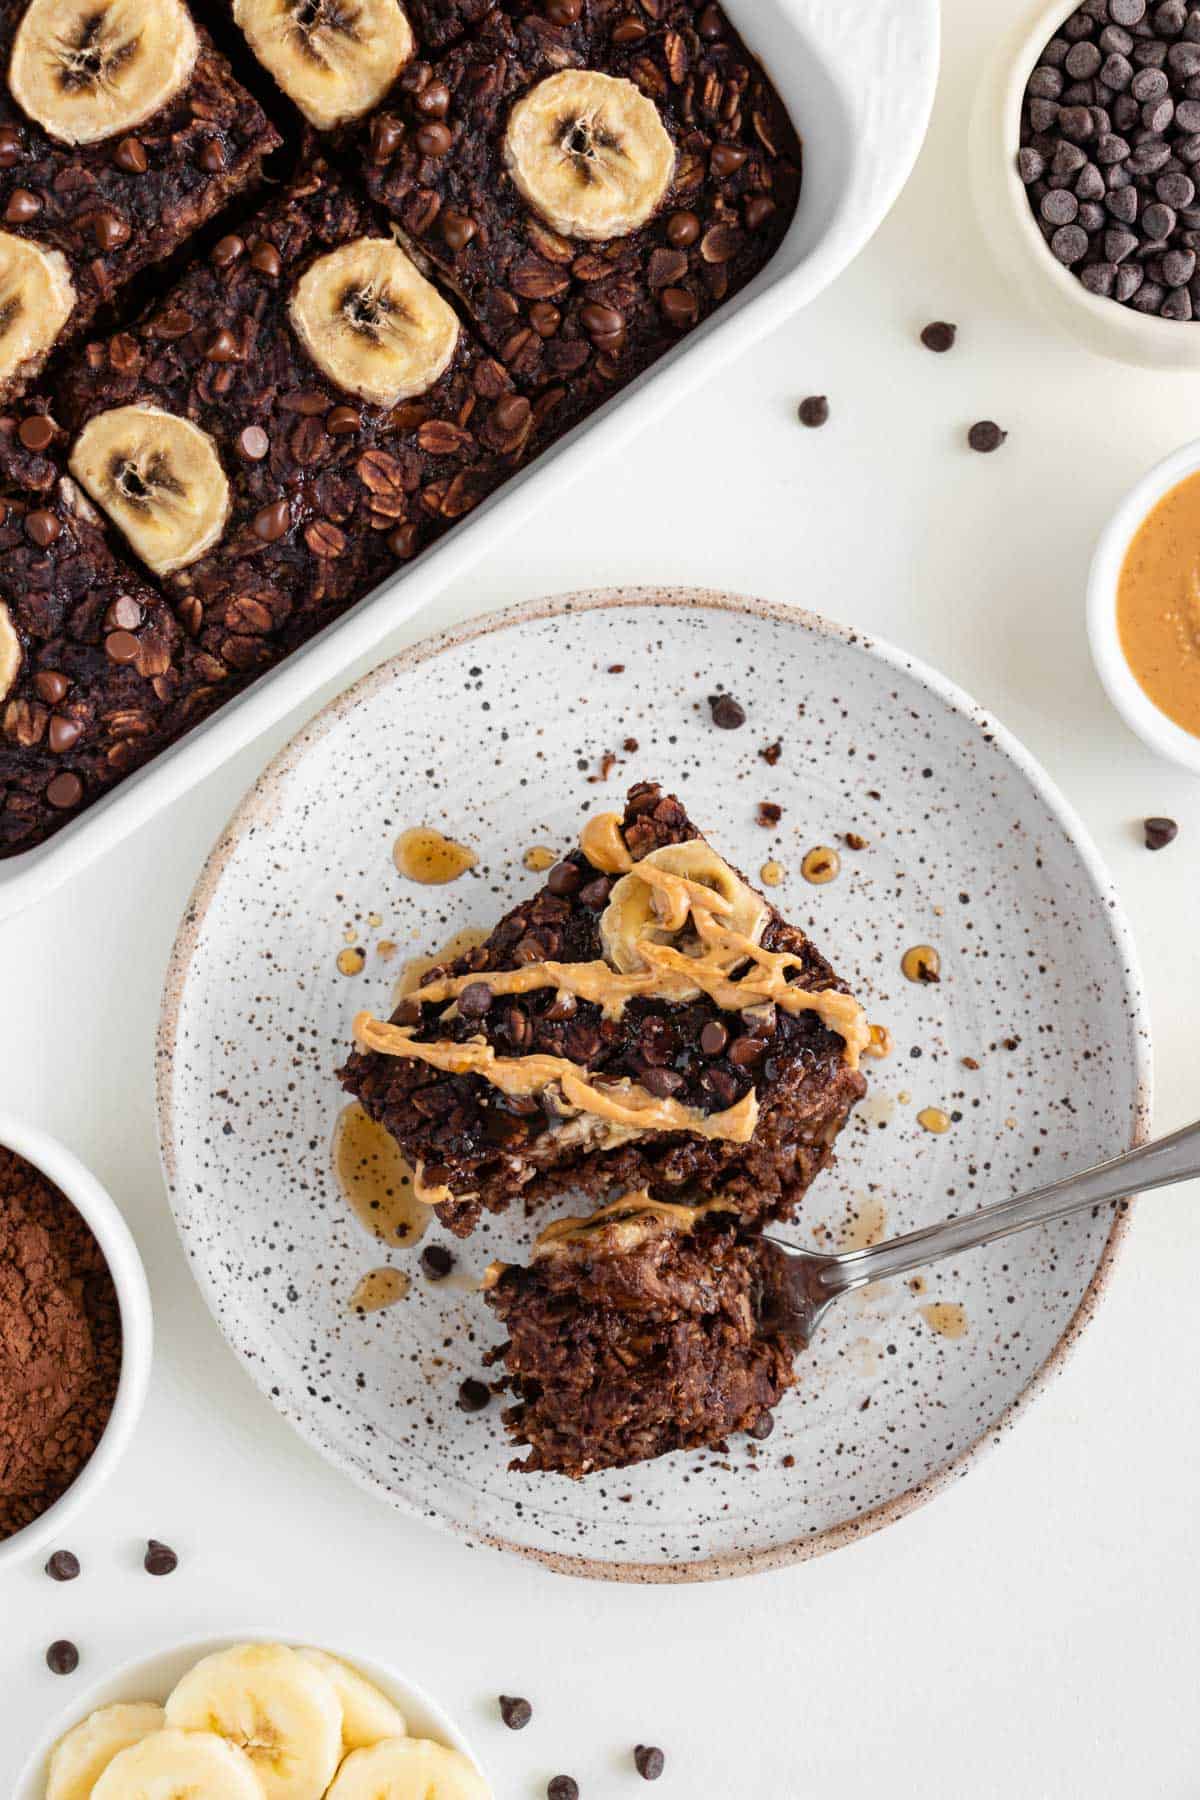 a tray of chocolate banana baked oatmeal placed beside a partially eaten slice that's topped with peanut butter, maple syrup, and sliced bananas